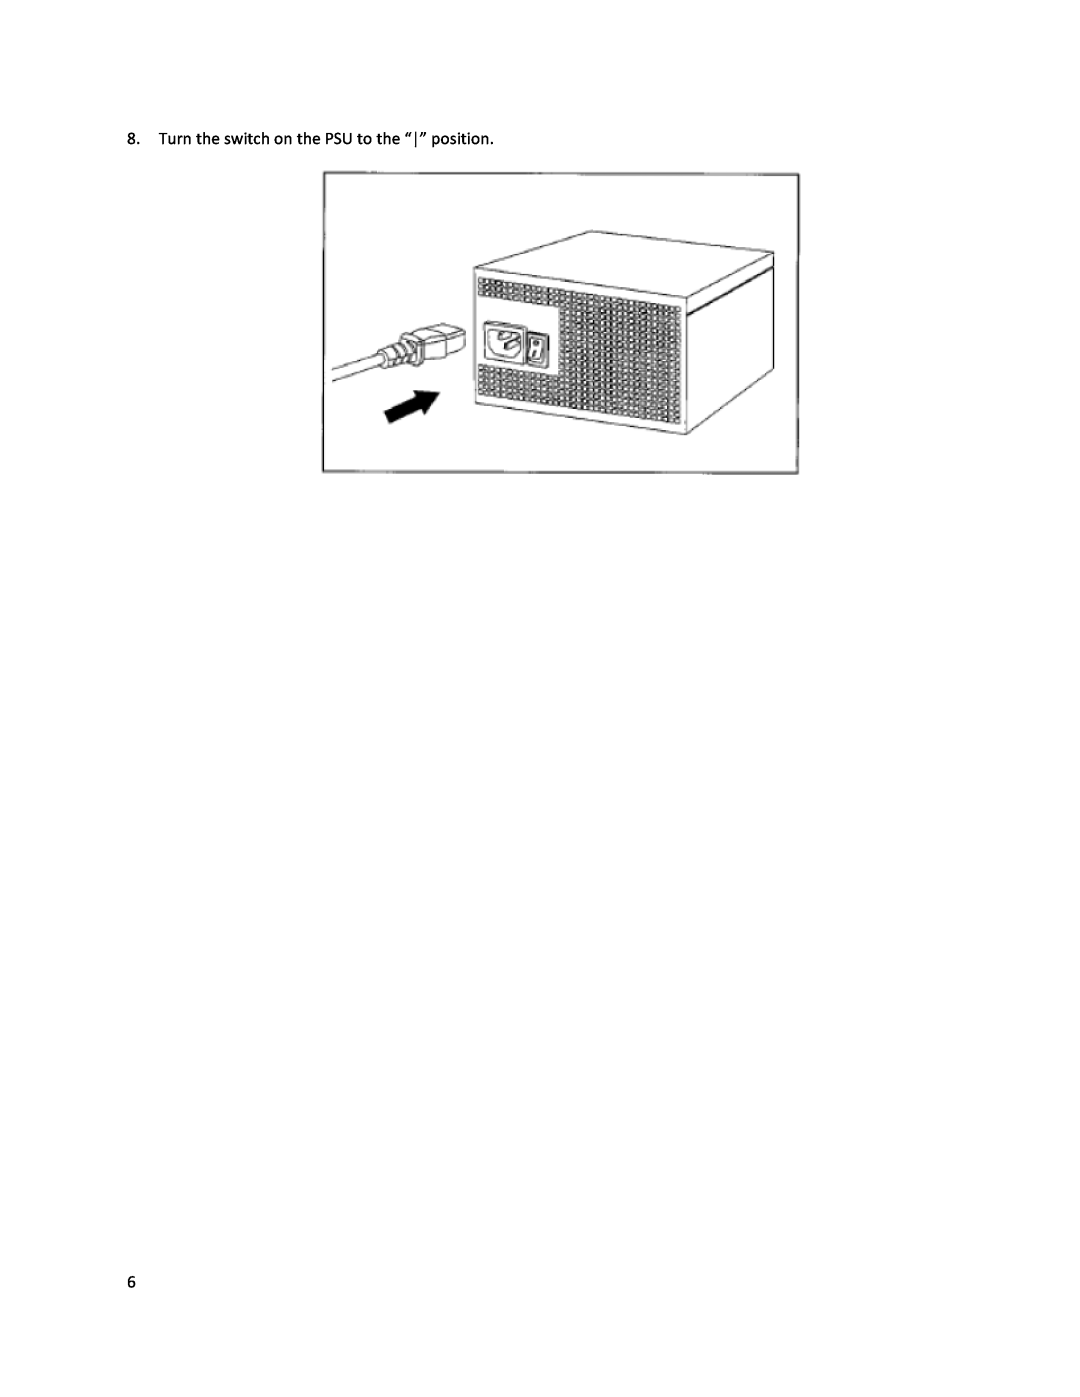 Antec HCG-400 user manual Turn the switch on the PSU to the “” position 